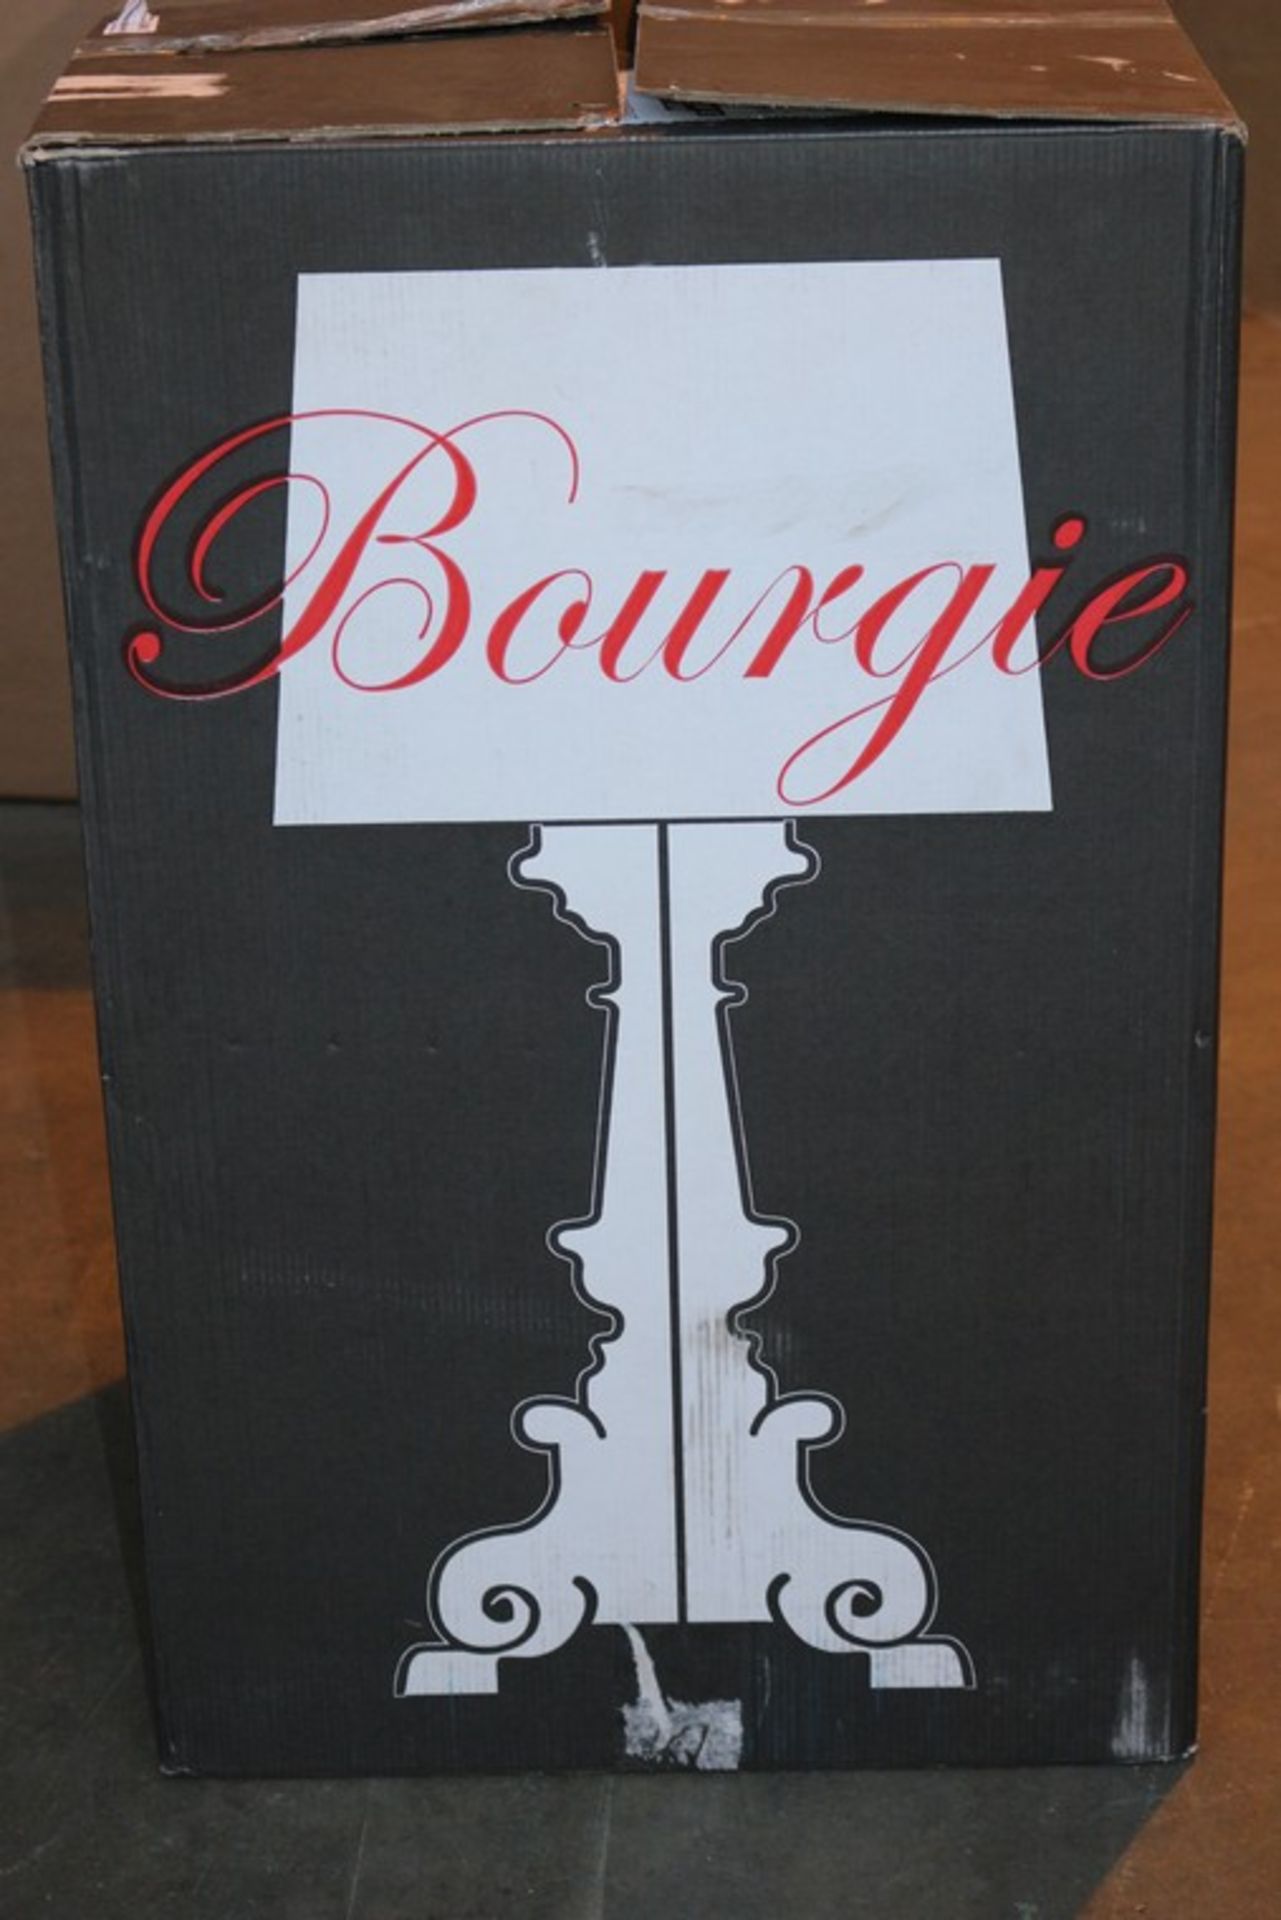 1 x BOXED KARTELL BOURGIE DESIGNER LAMP *PLEASE NOTE THAT THE BID PRICE IS MULTIPLIED BY THE